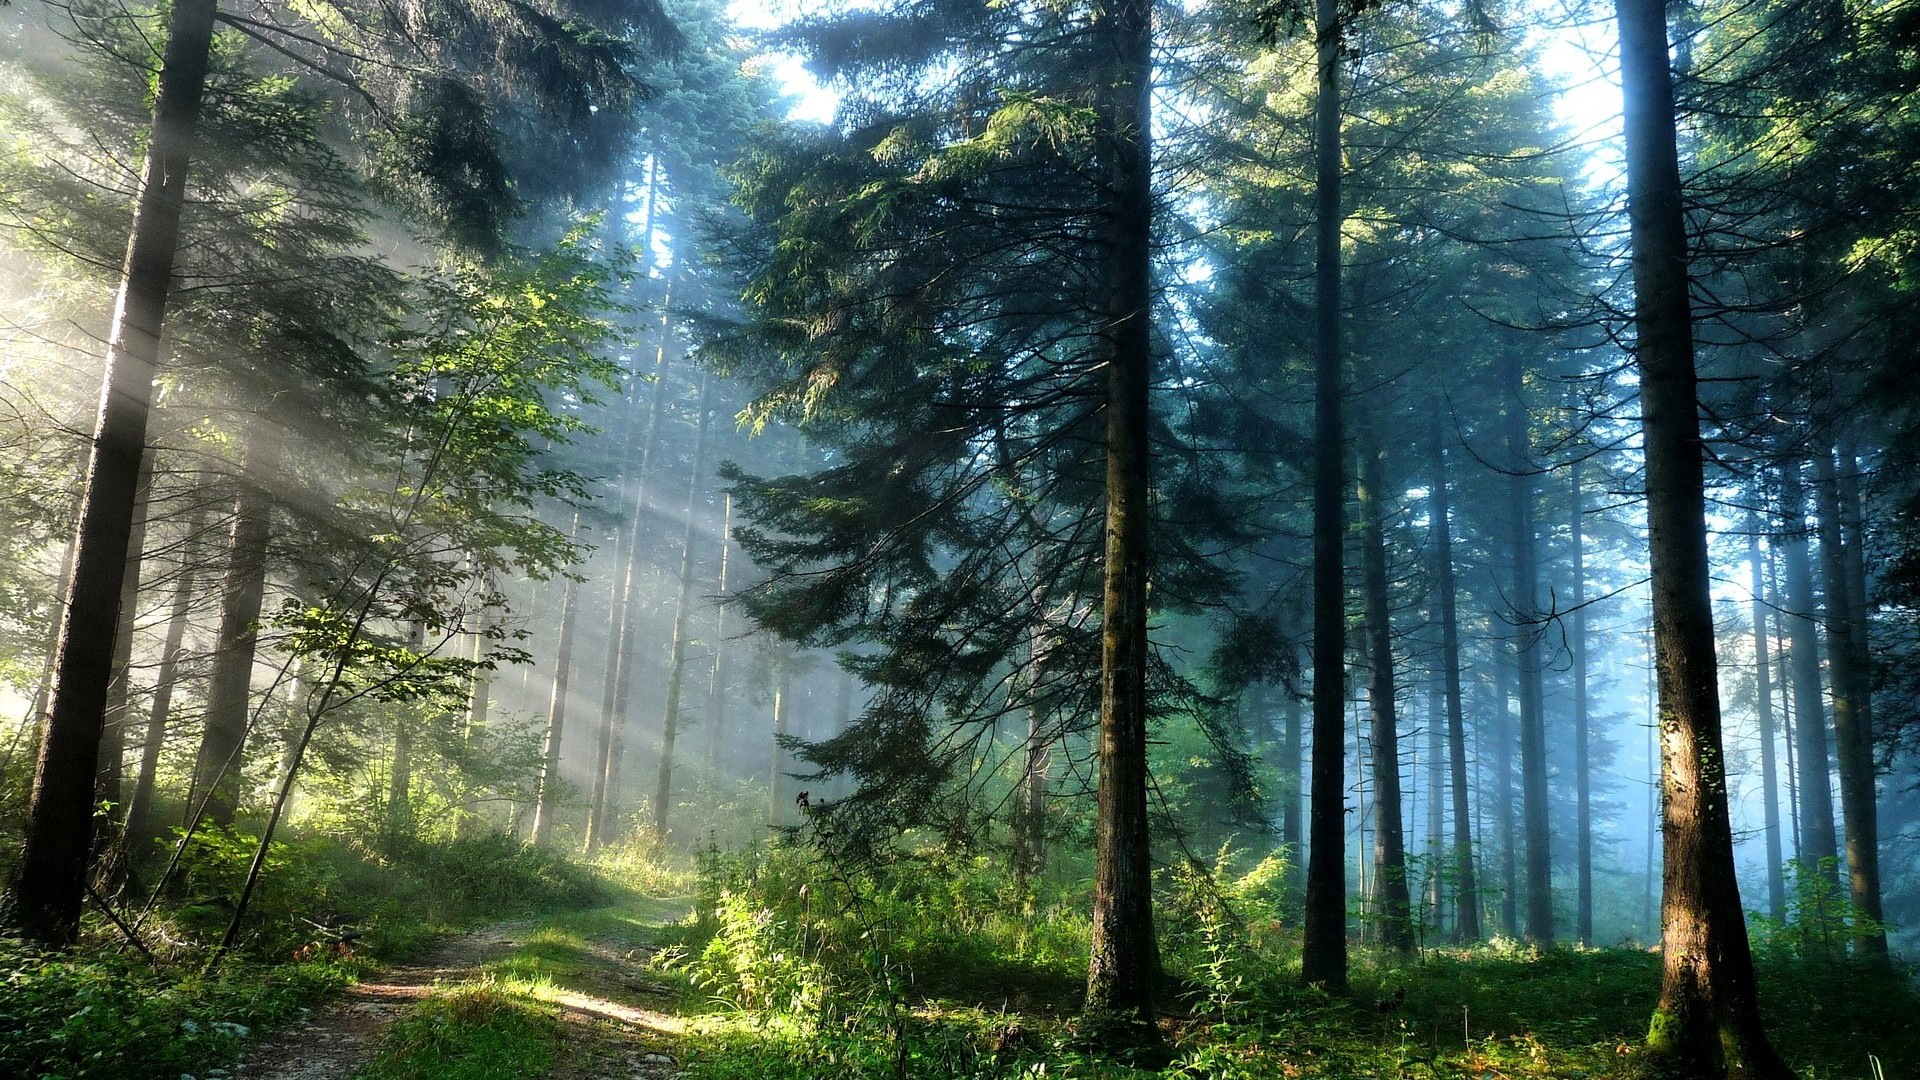 Windows 8 theme forest scenery HD wallpapers #1 - 1920x1080